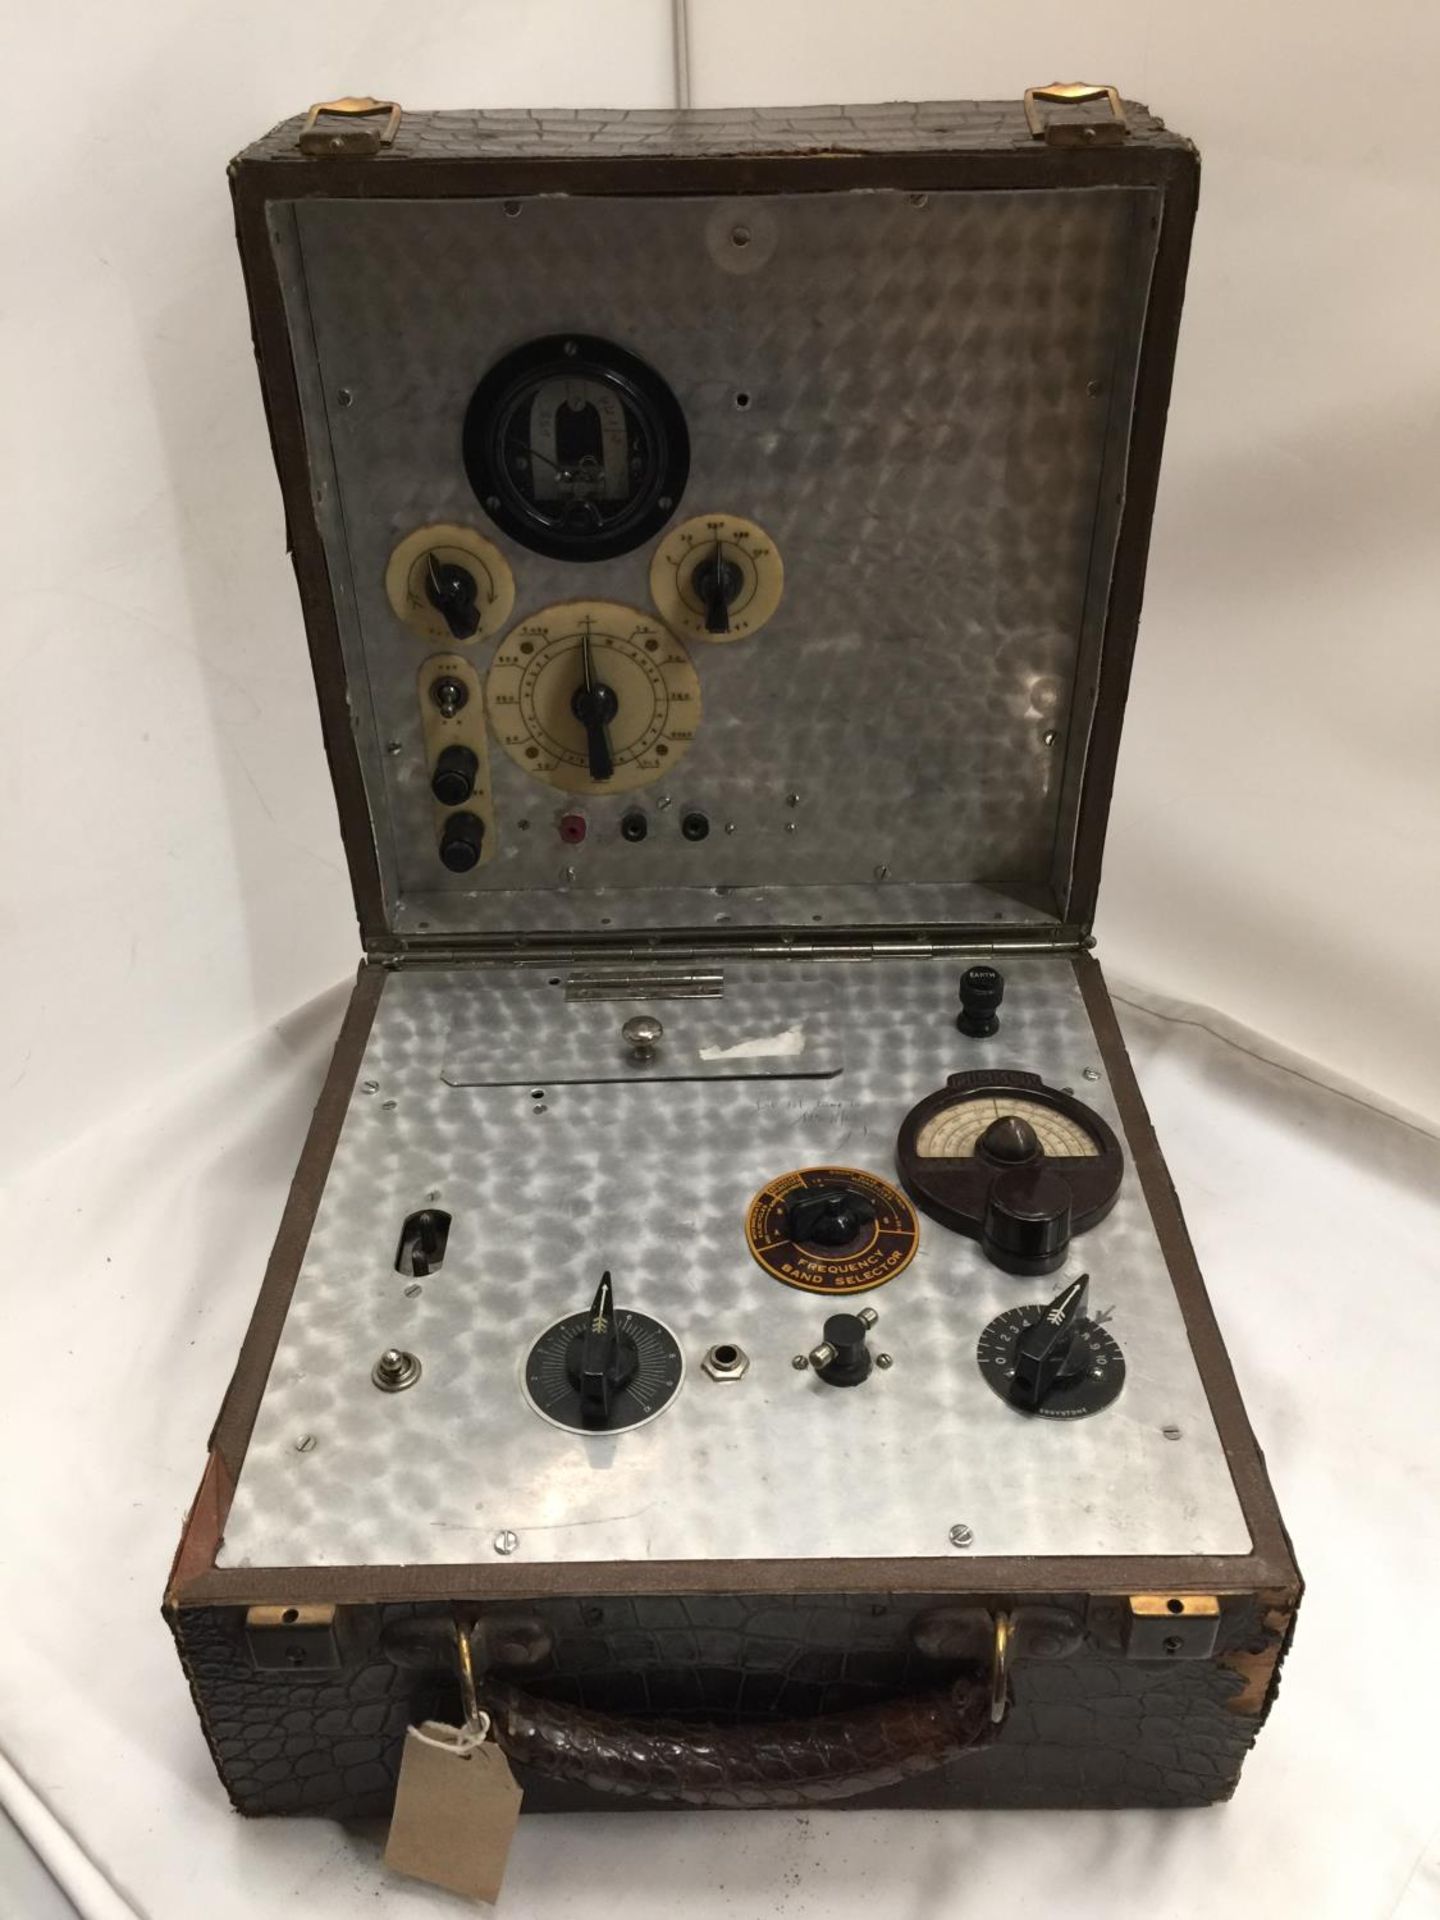 A MID 20TH CENTURY BRITISH TRANSCEIVER SUITCASE RADIO, SIMILAR TO ONES USED BY THE S.O.E FIELD - Bild 2 aus 10